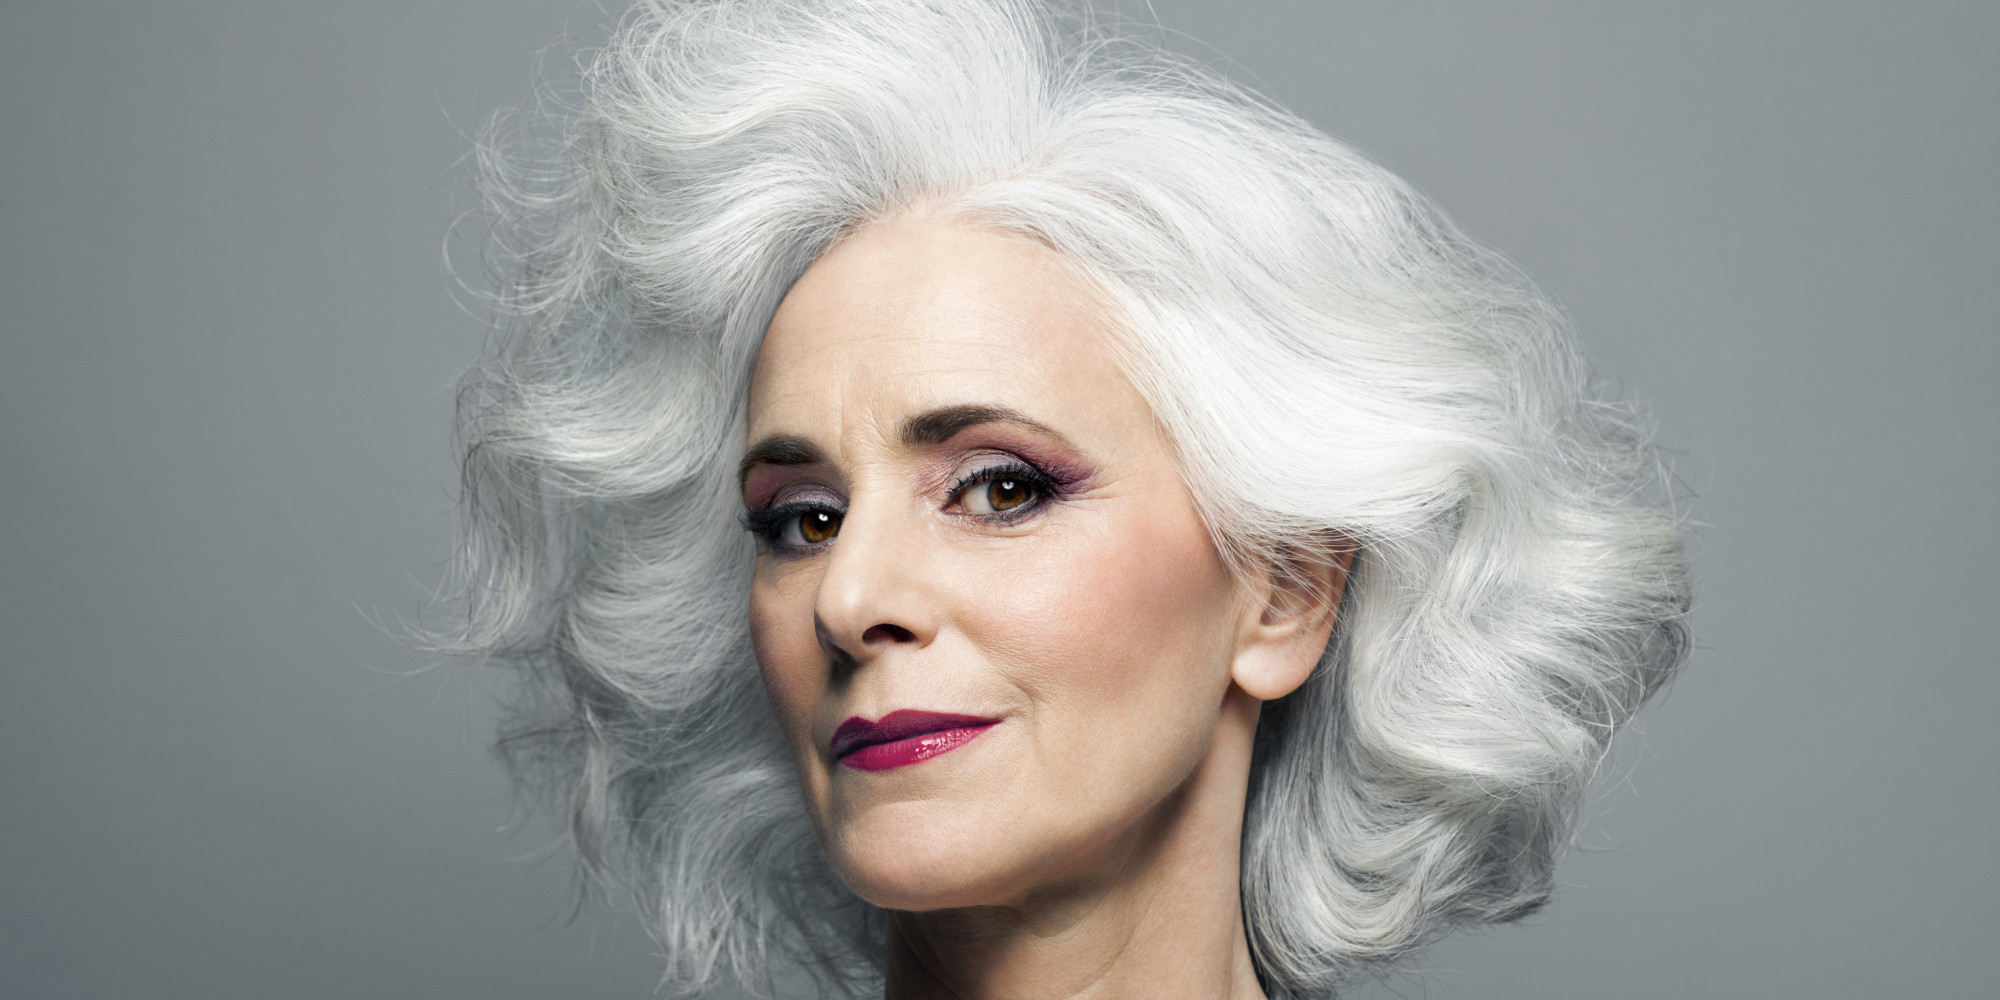 Eye Makeup For Over 50 Makeup Tips For Older Women Looking Fabulous At 50 And Beyond